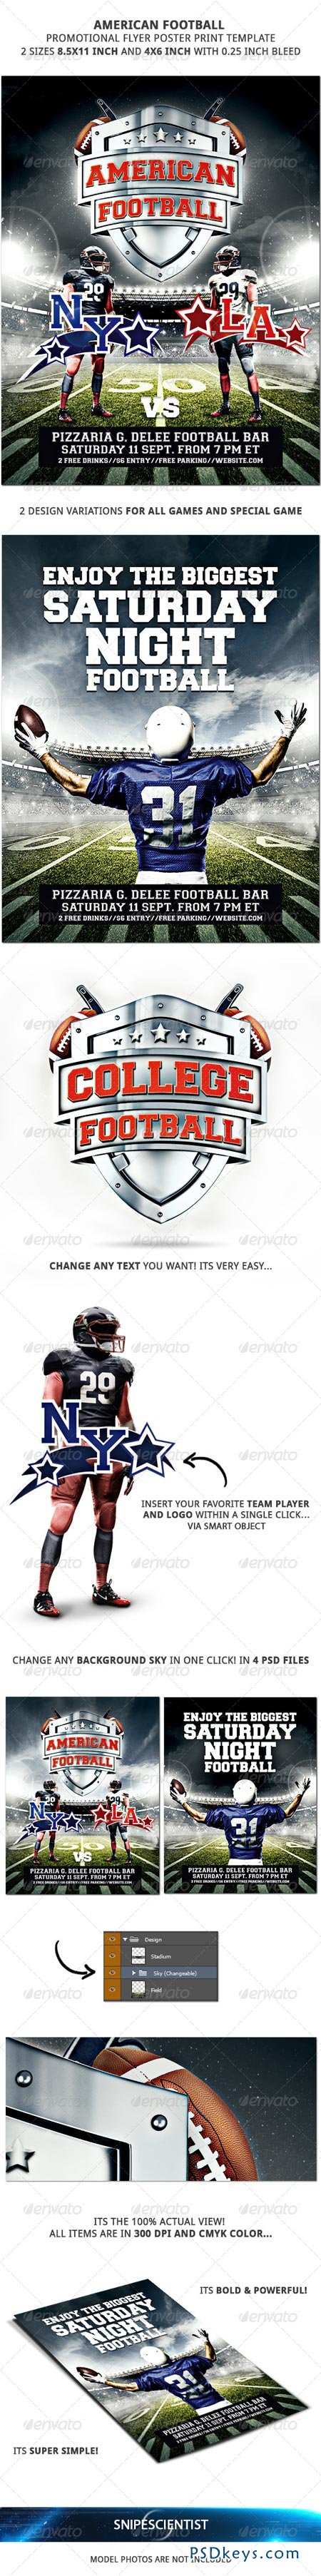 American Football Promotional Flyer Poster 2 Sizes 8603931